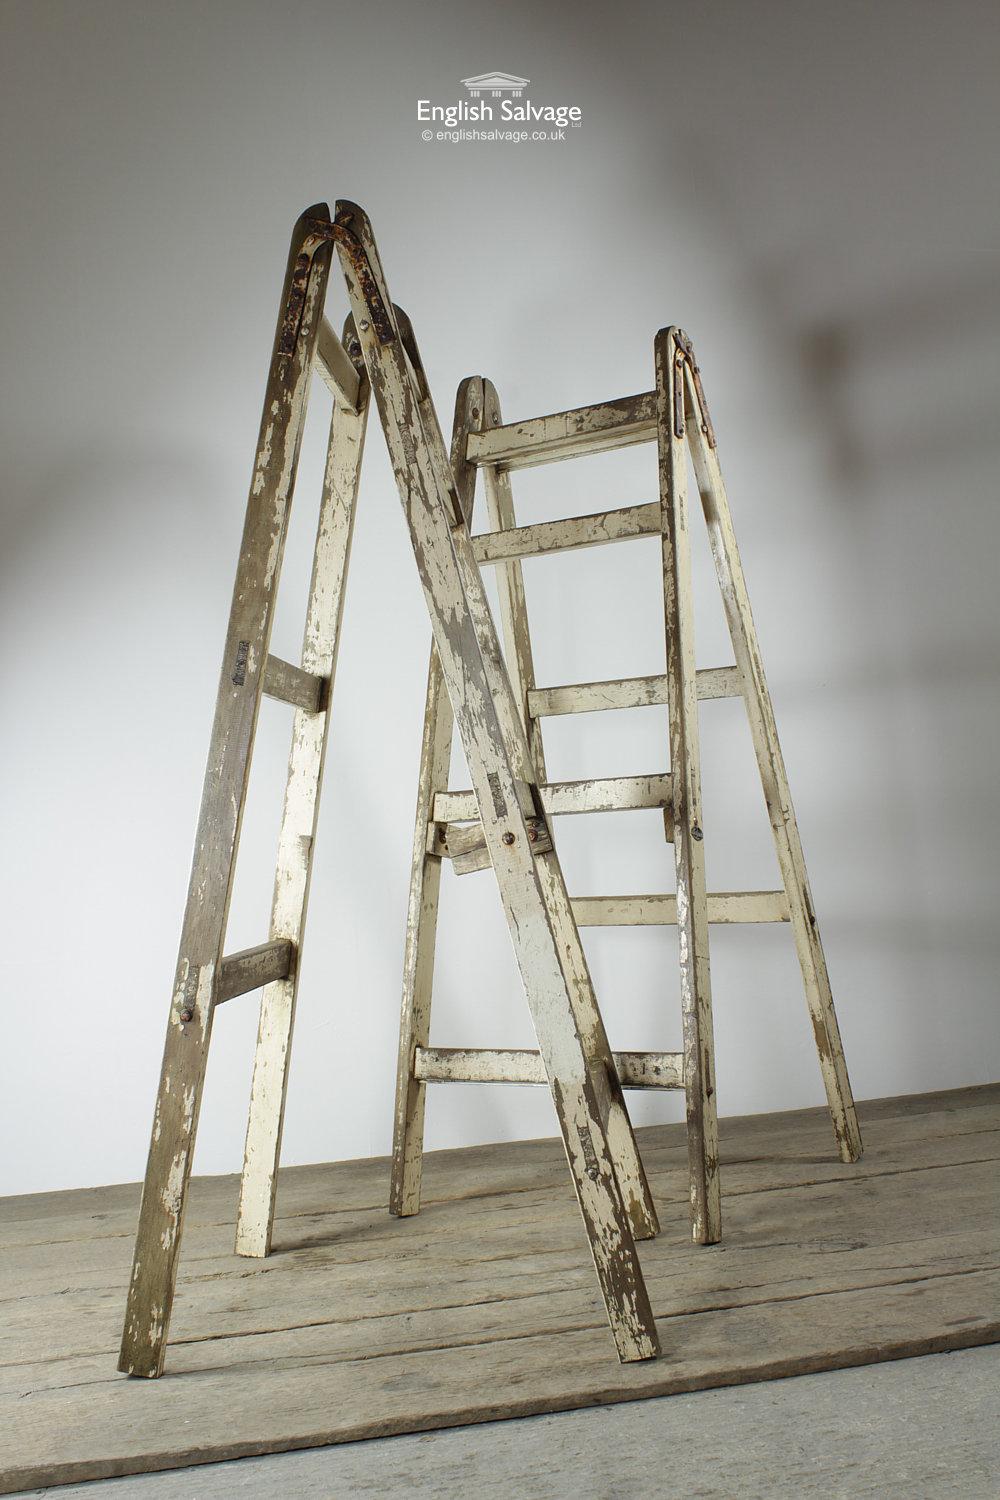 wooden ladders for sale